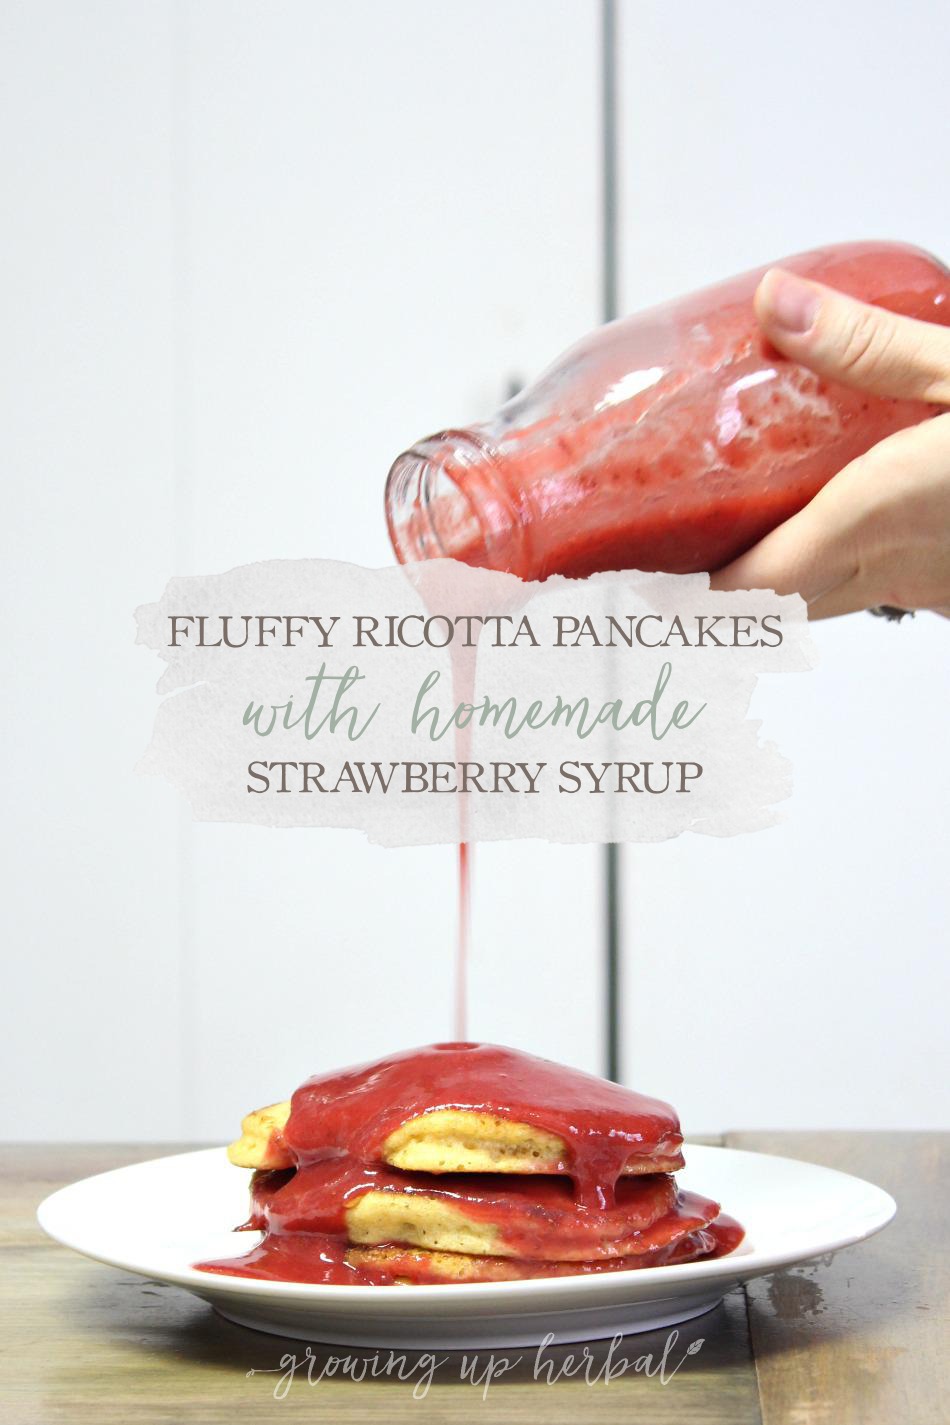 Fluffy Ricotta Pancakes With Homemade Strawberry Syrup | Growing Up Herbal | Wanna know what our favorite pancake and homemade syrup recipes are? Get them in today's post, and pin it to your Pinterest boards for safe keeping!